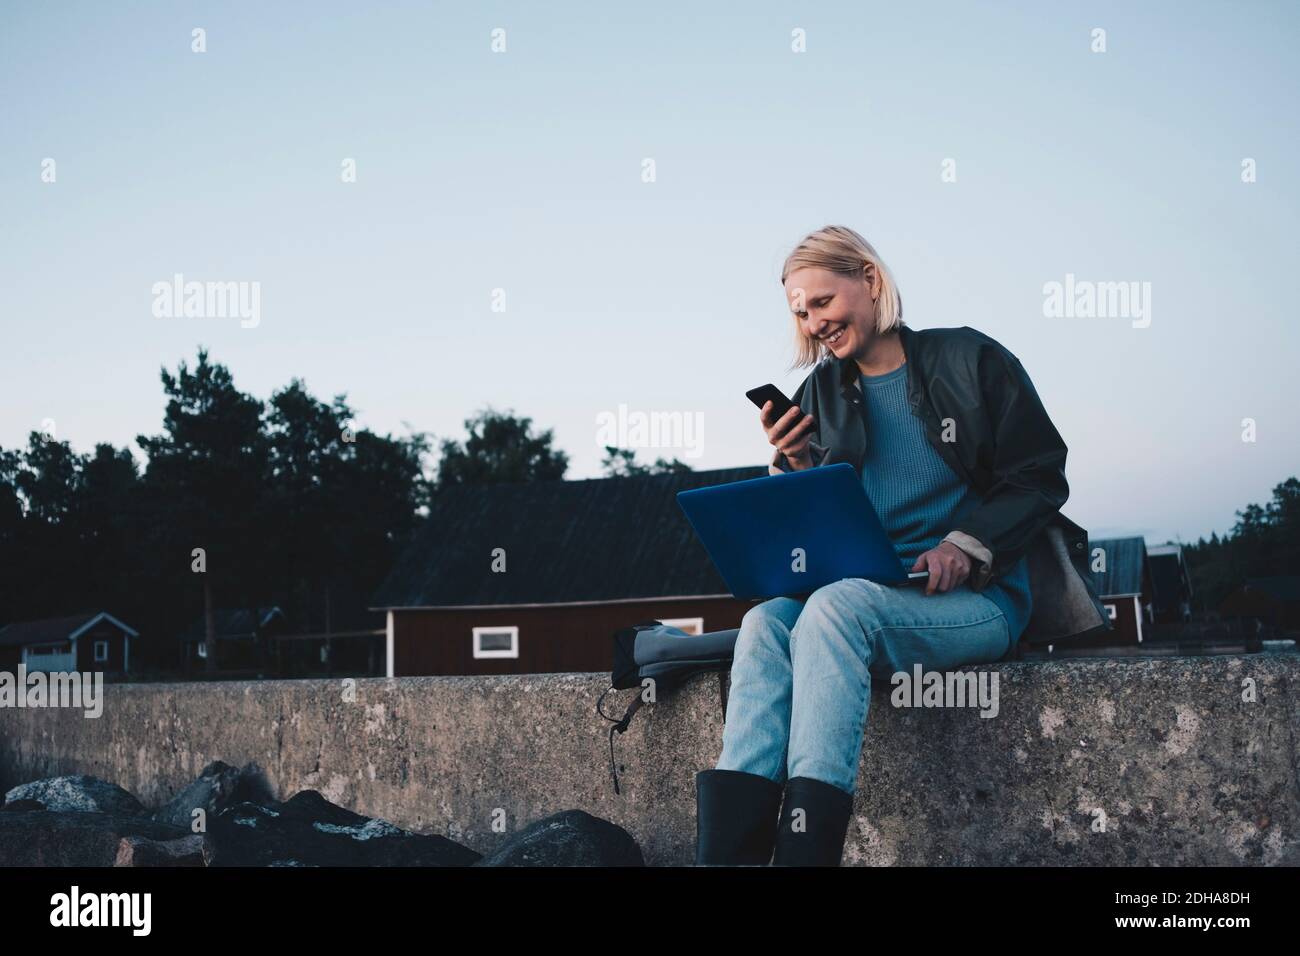 Smiling woman looking at mobile phone and holding laptop while sitting on retaining wall Stock Photo